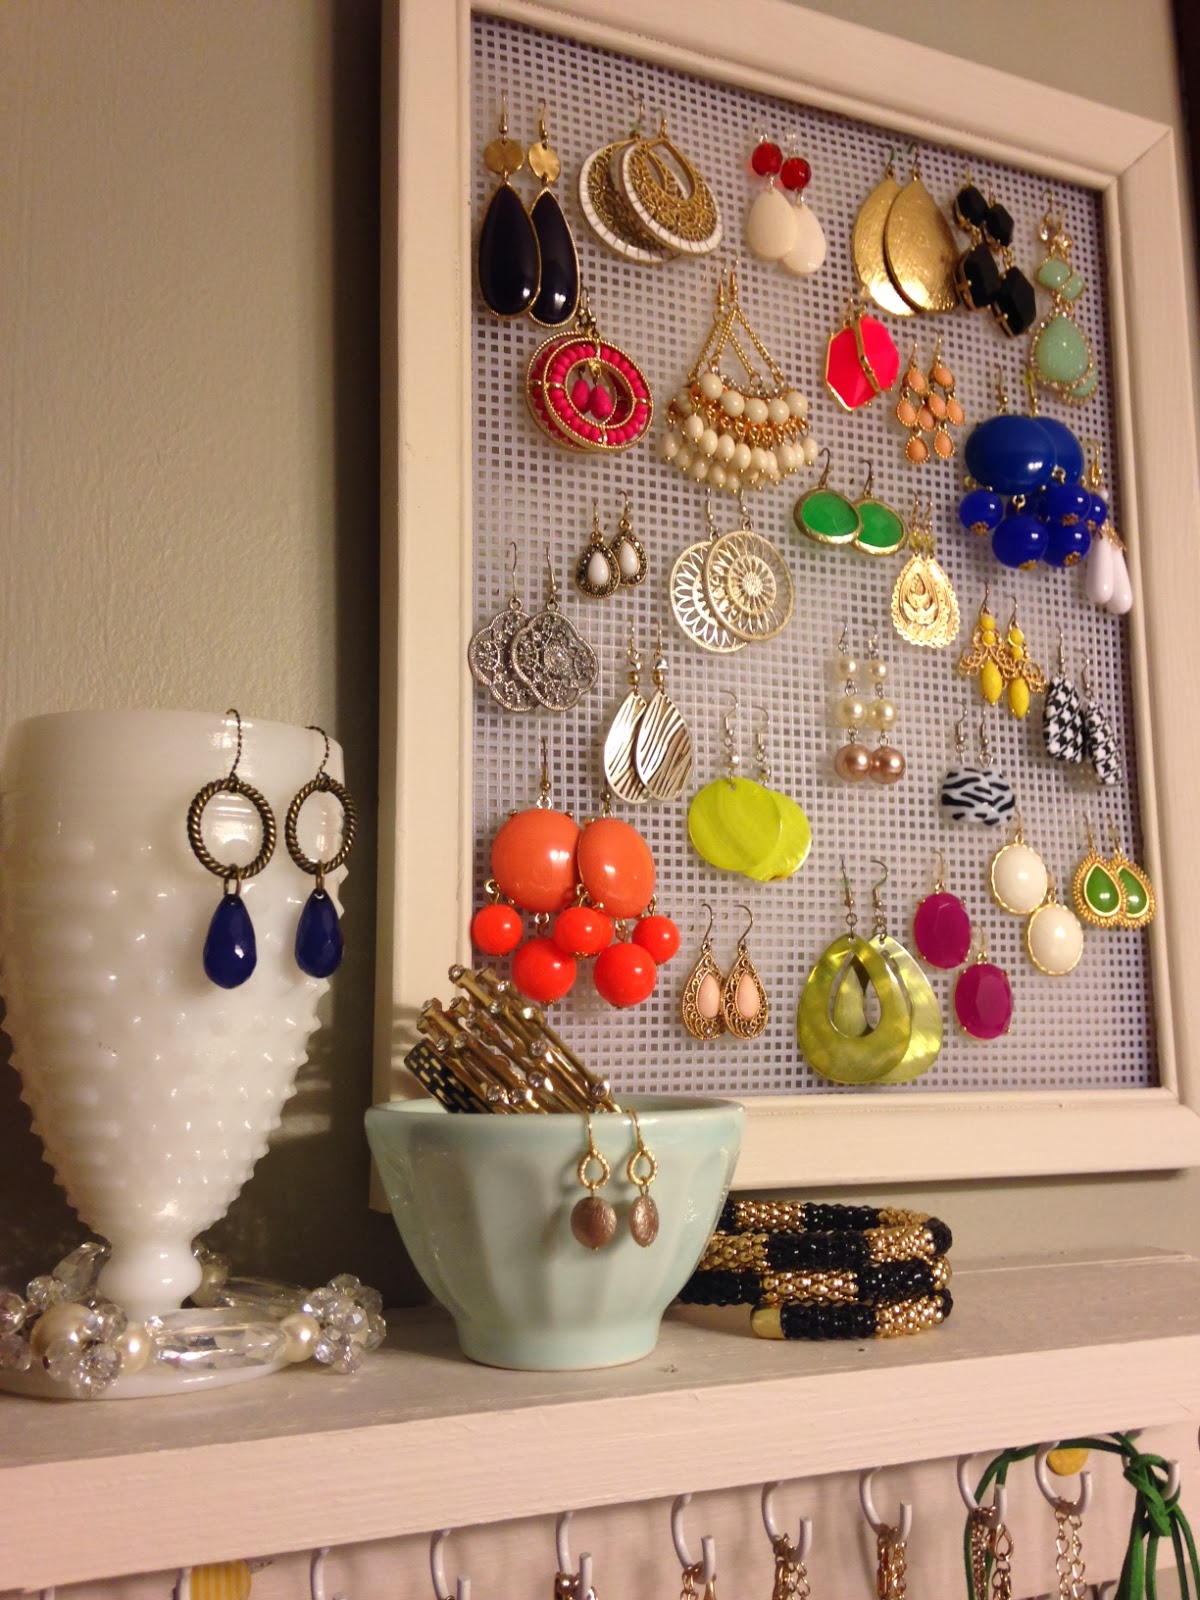 Working on My Forever: DIY Jewelry Organization!